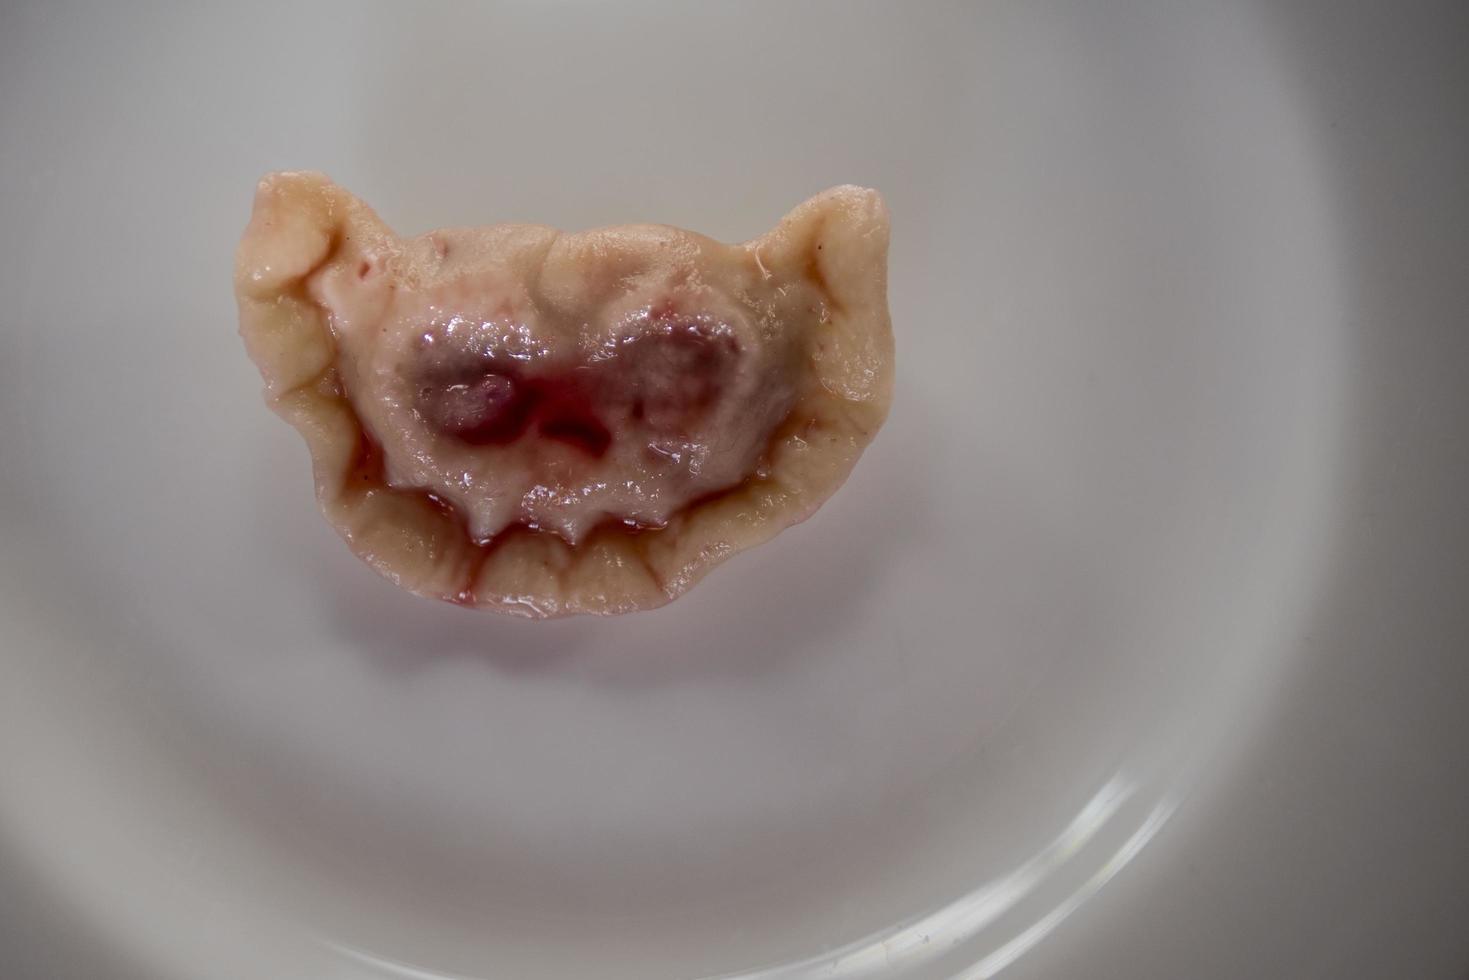 dumplings with cherries in the form of a terrible muzzle dracula vampire photo